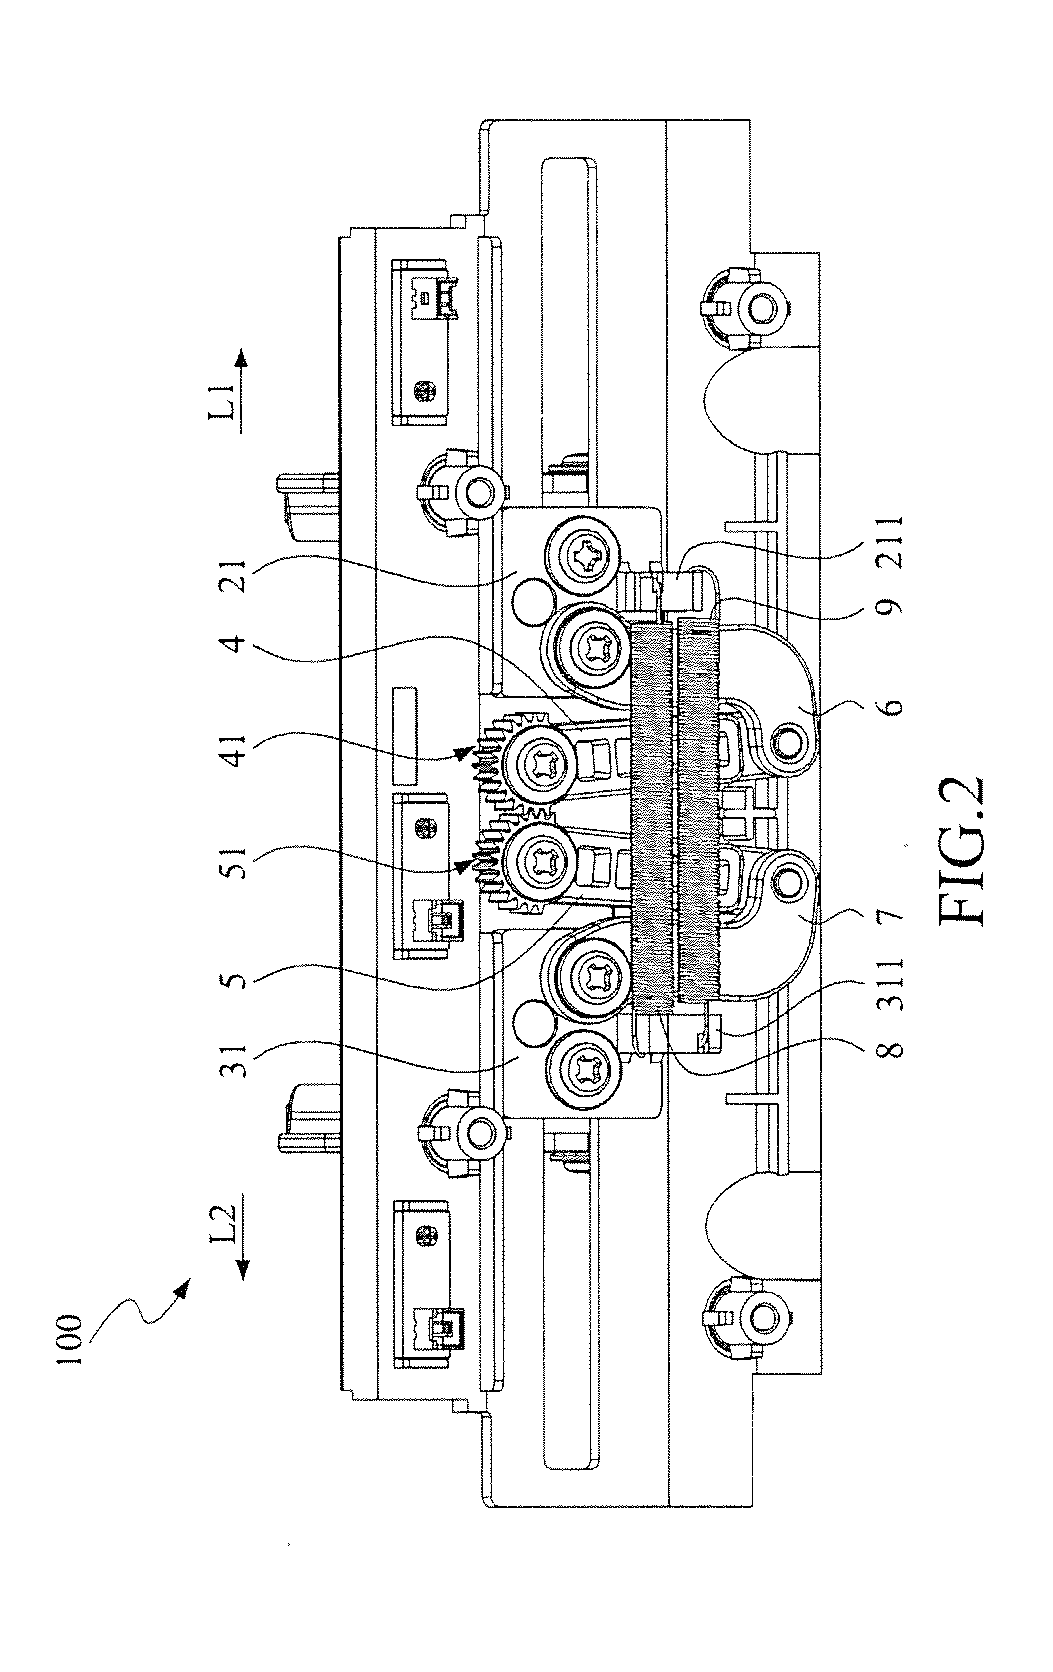 Device for positioning platen roller